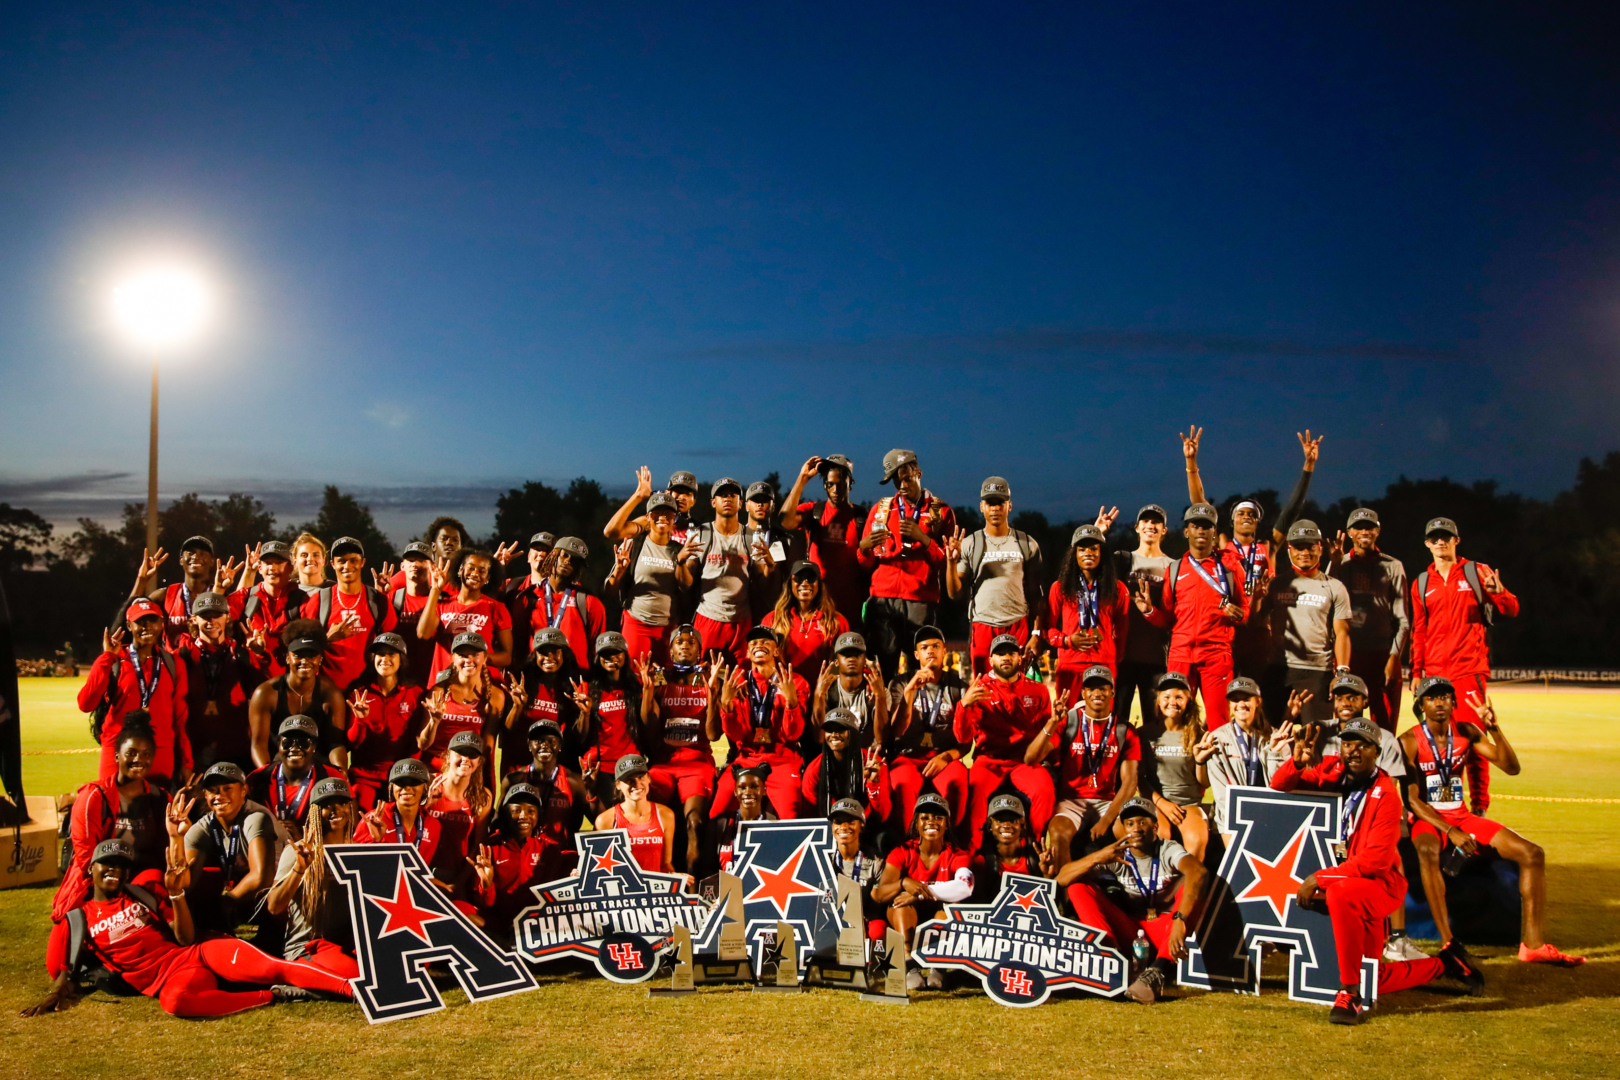 Both the men's and women's UH track and field teams captured conference titles in dominating fashion Sunday at the 2021 AAC Championships. | Courtesy of UH athletics